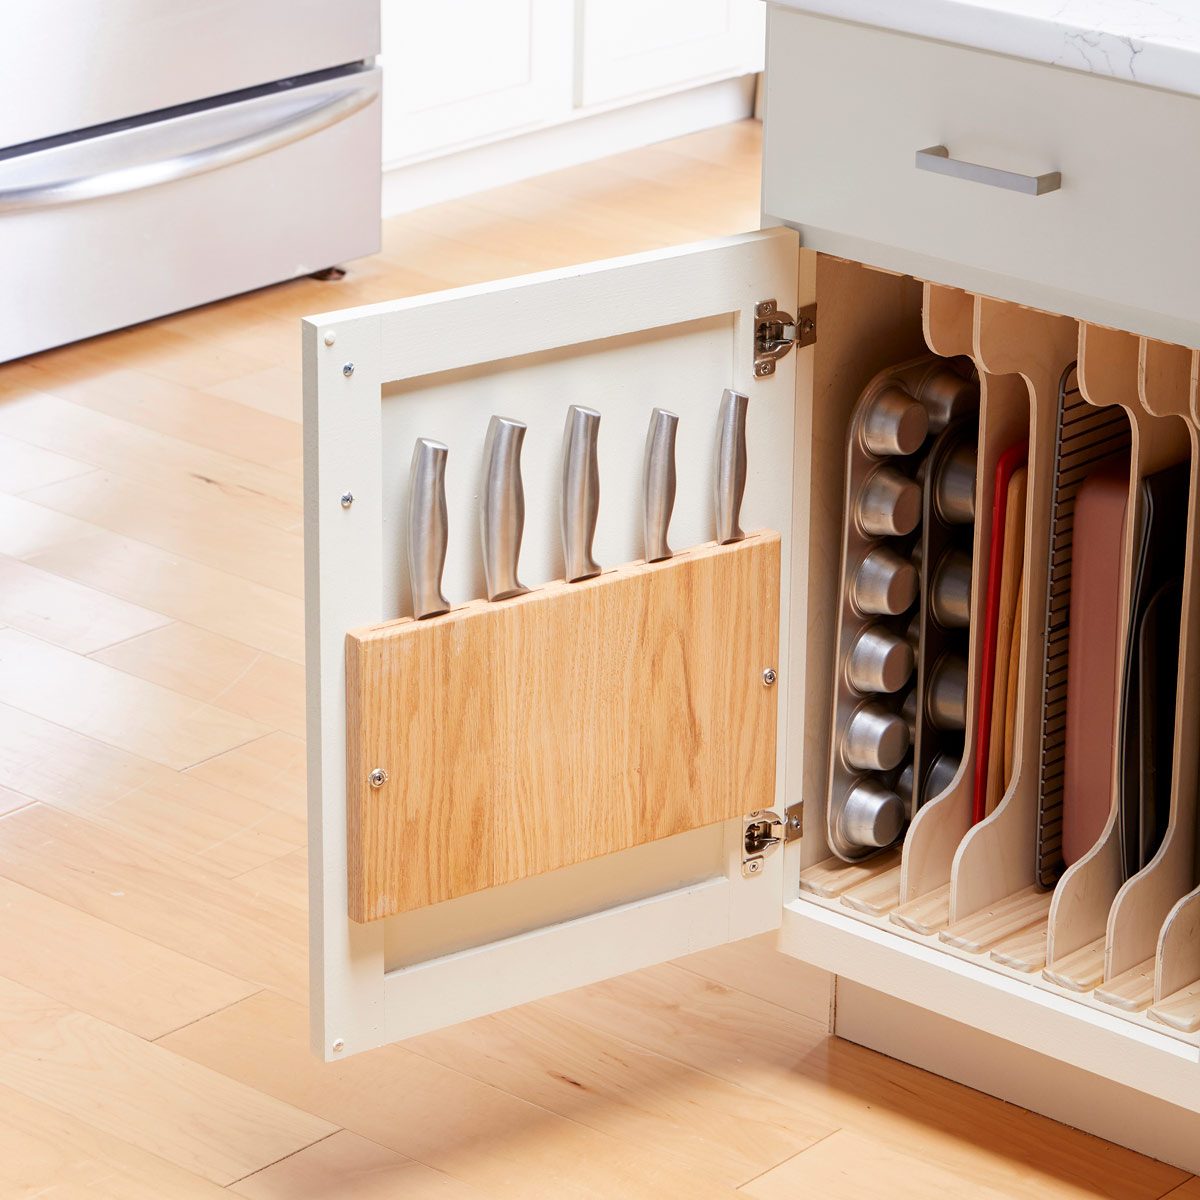 How to Make a Knife Rack for Inside Your Family Handyman